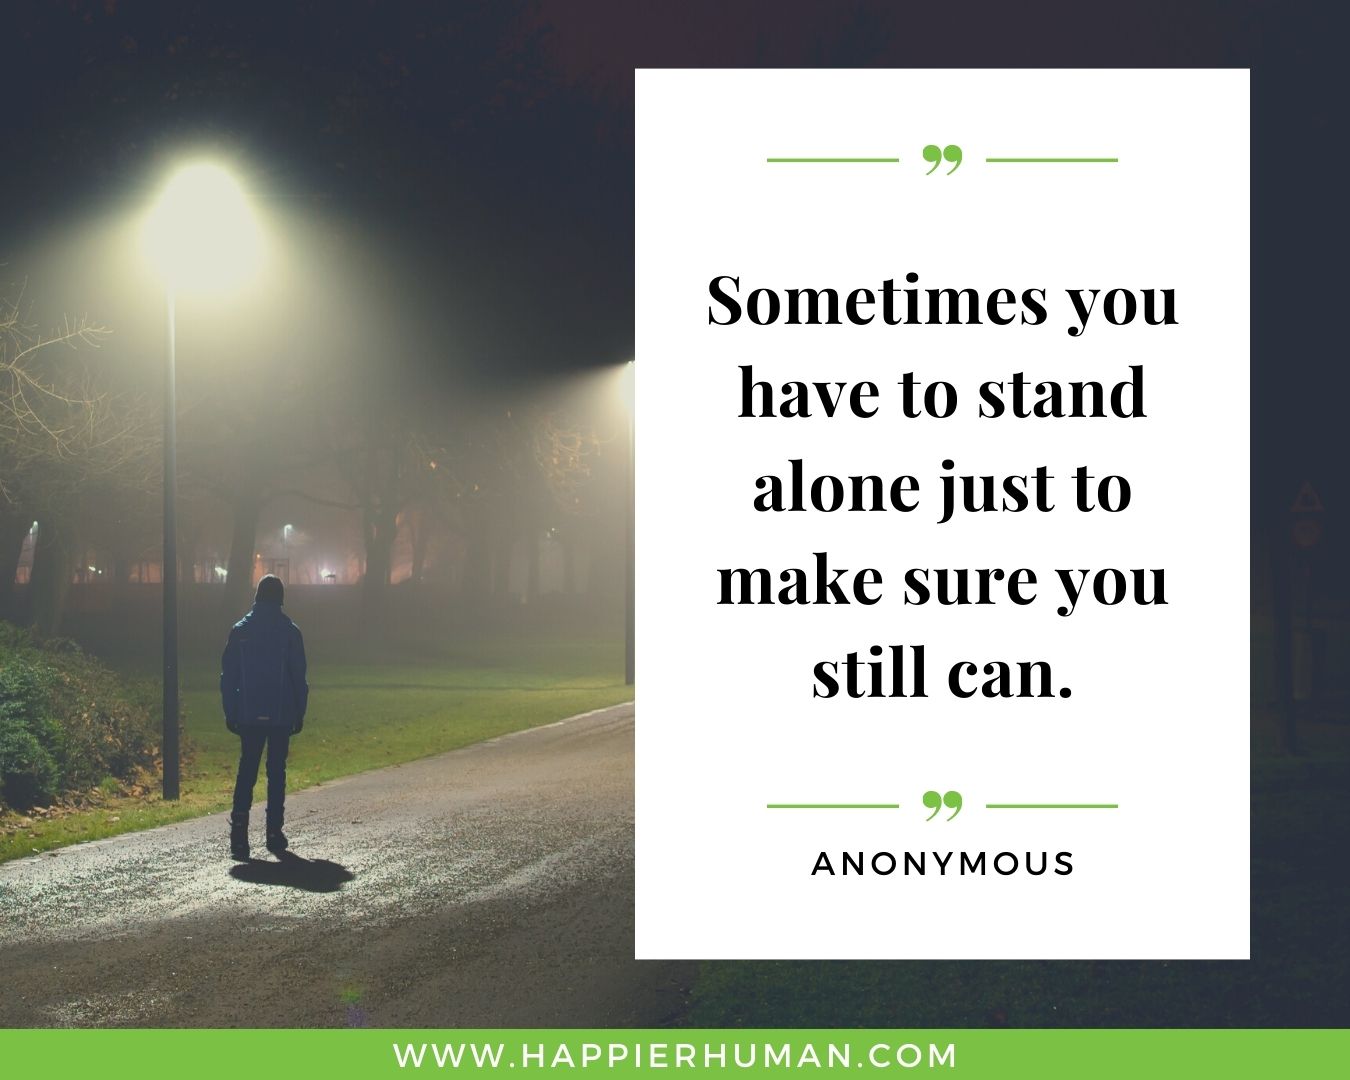 Loneliness Quotes - “Sometimes you have to stand alone just to make sure you still can.” – Anonymous